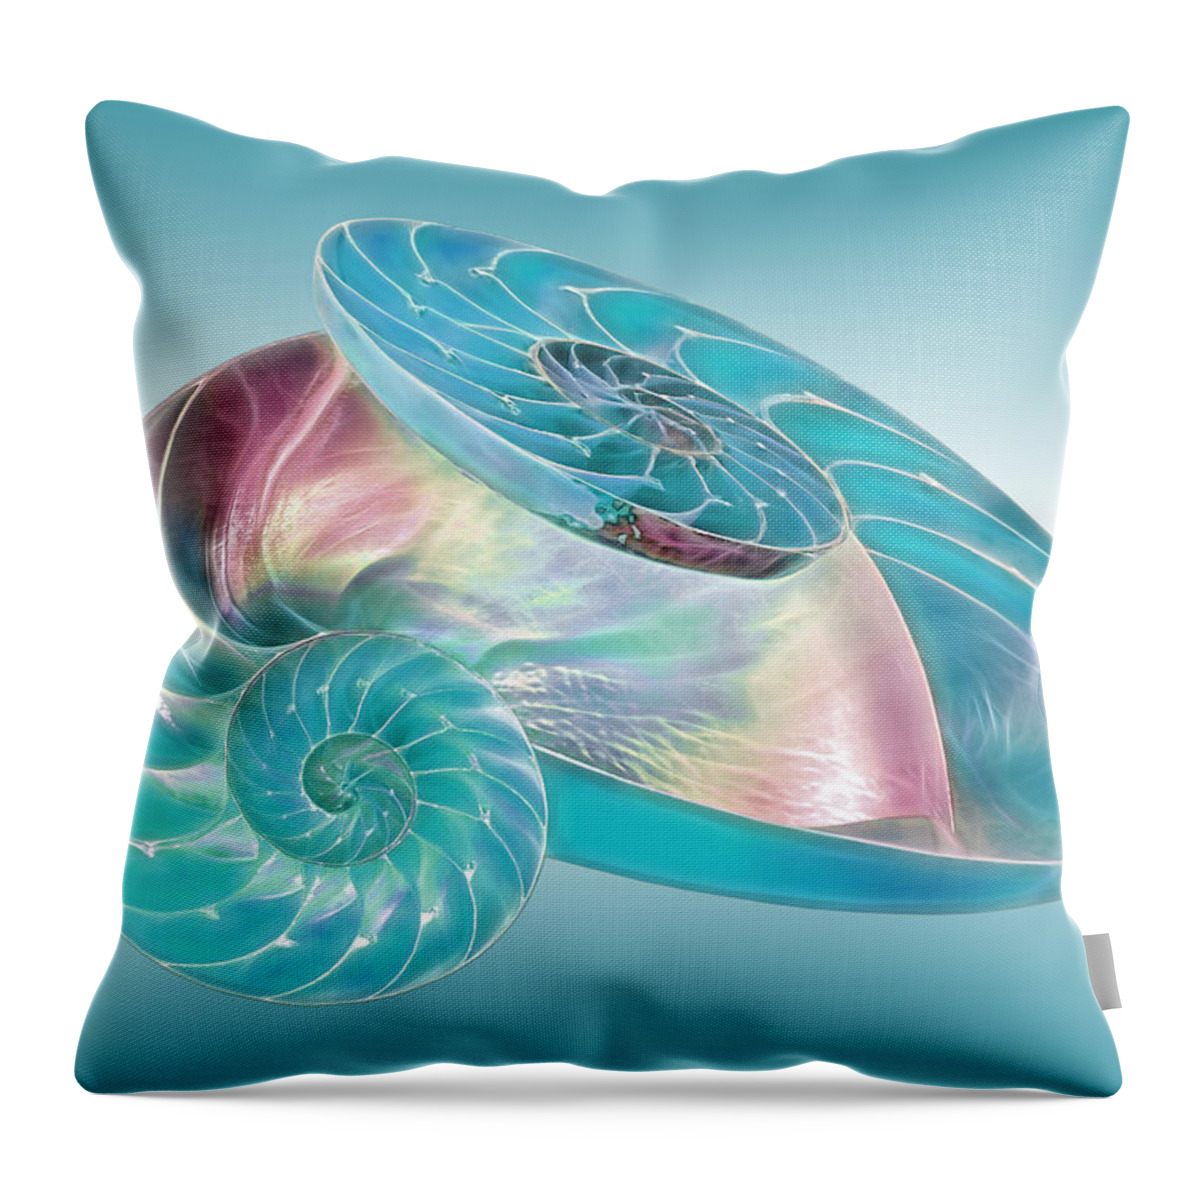 Nautilus Shell Throw Pillow featuring the photograph Fantasy Seashells Entwined by Gill Billington